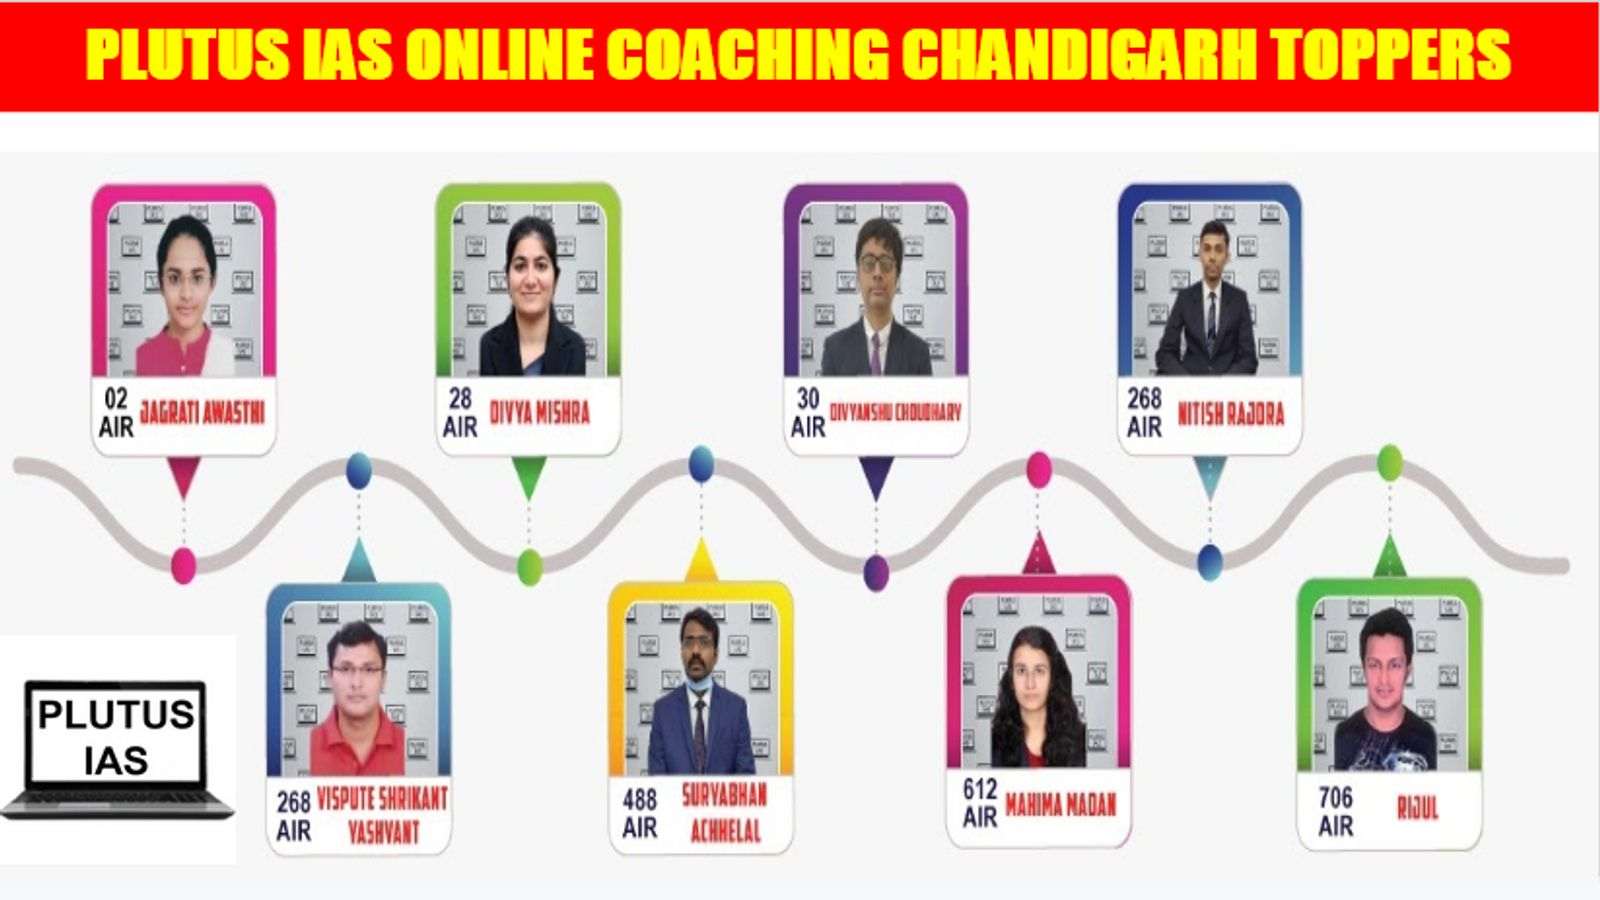 Plutus IAS Online Coaching Chandigarh Toppers